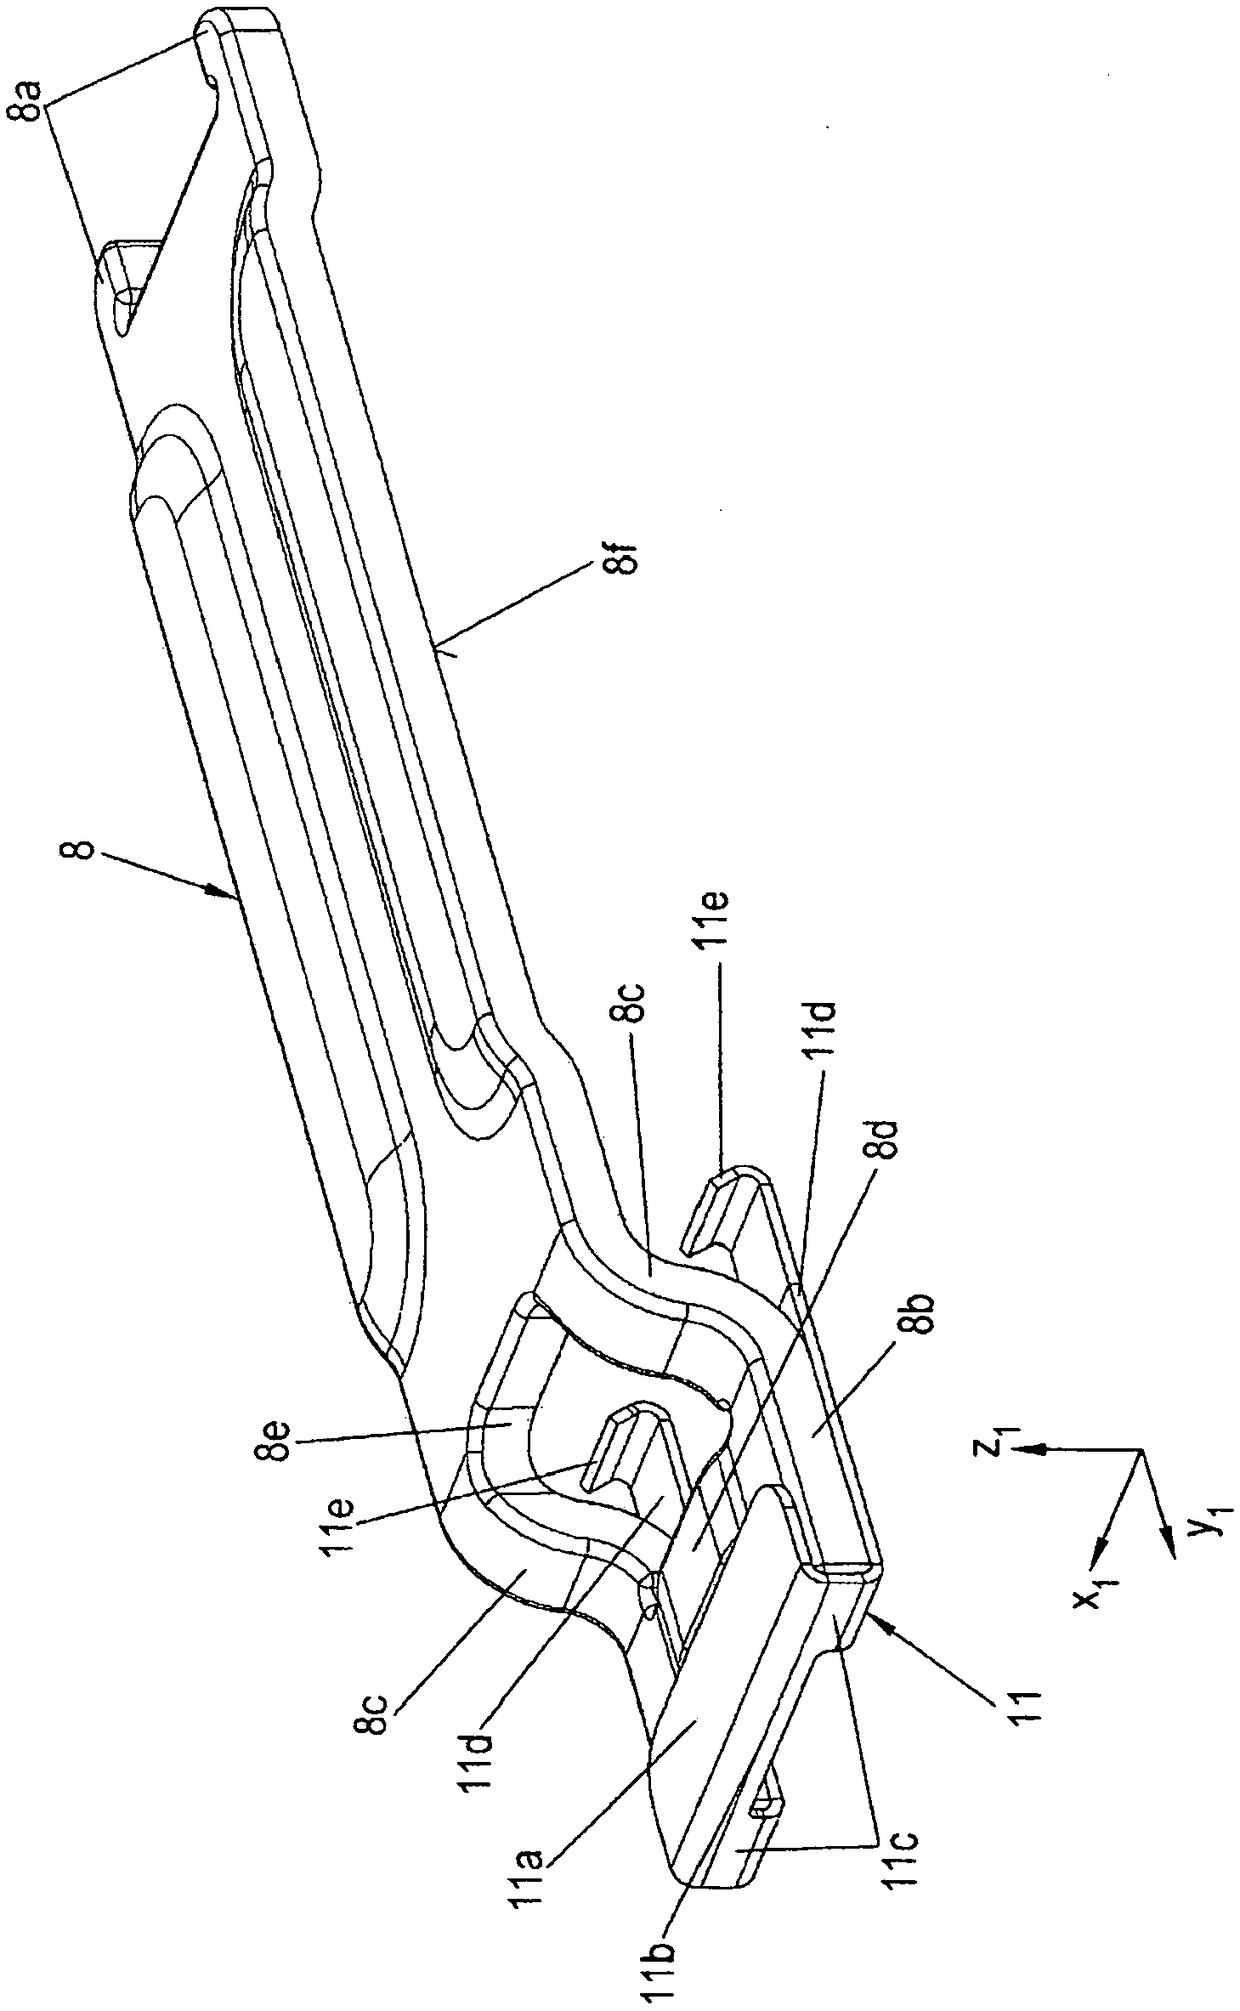 Disk brake having a pad-retaining clip and a securing device, and brake pad set